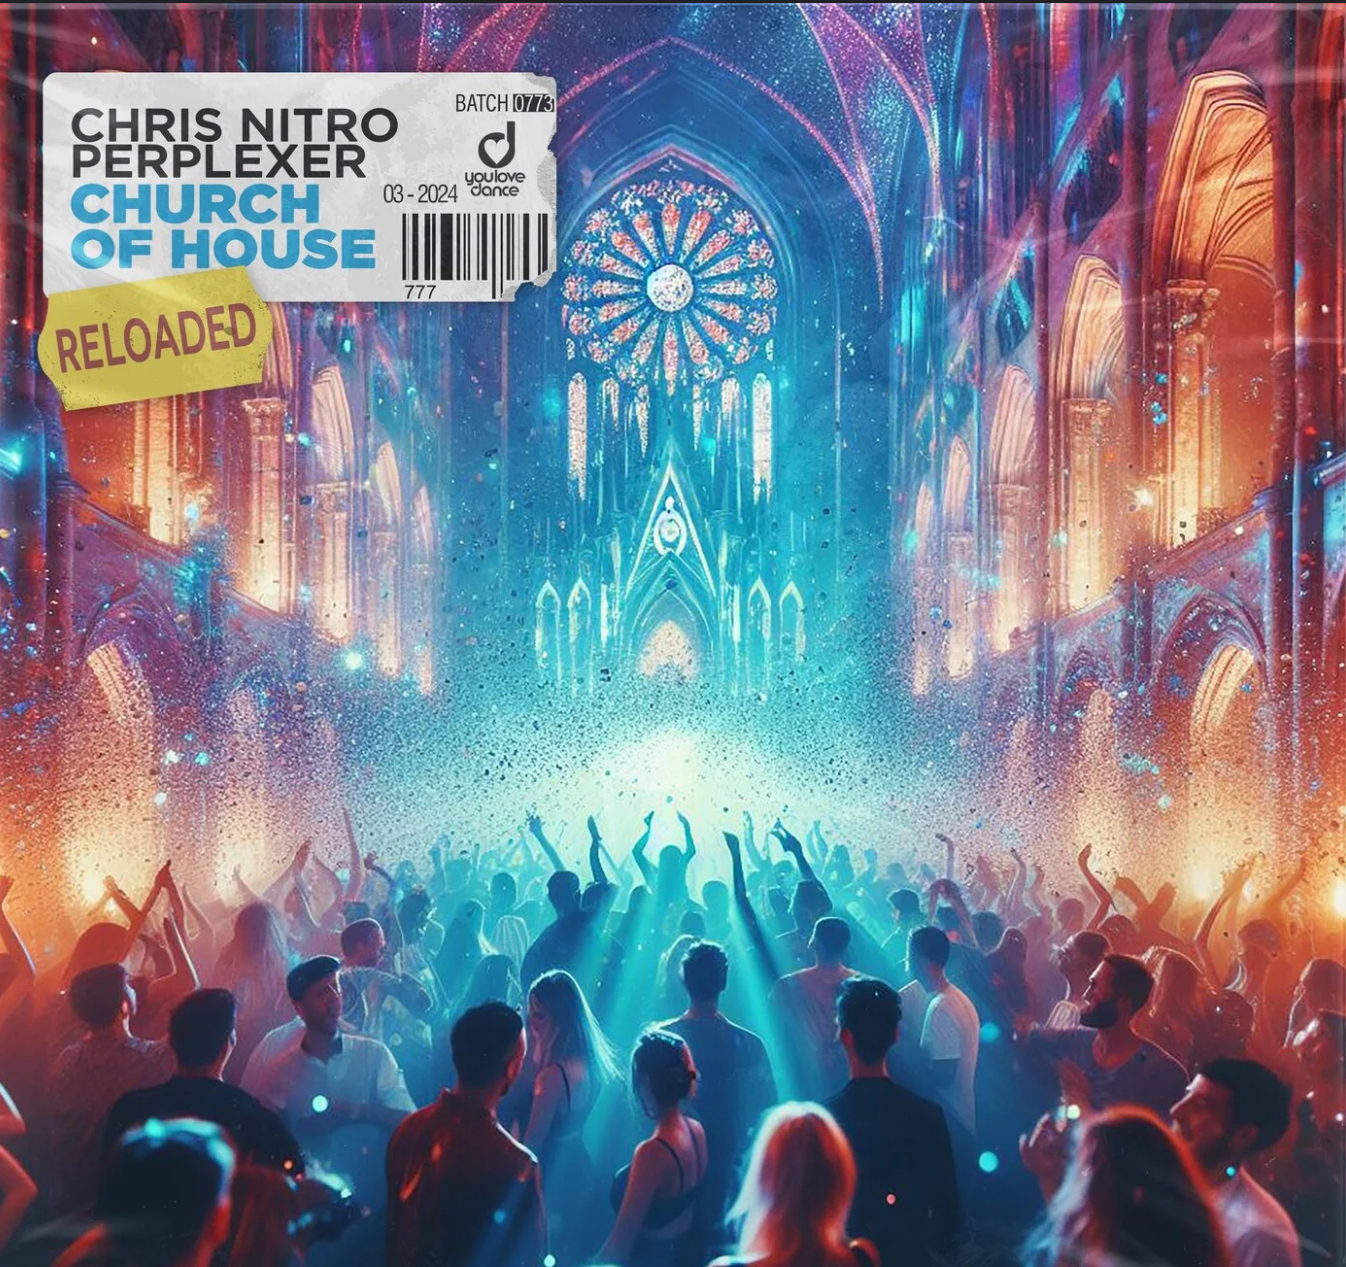 Chris Nitro ft. featuring Perplexer Church of House (Reloaded) cover artwork